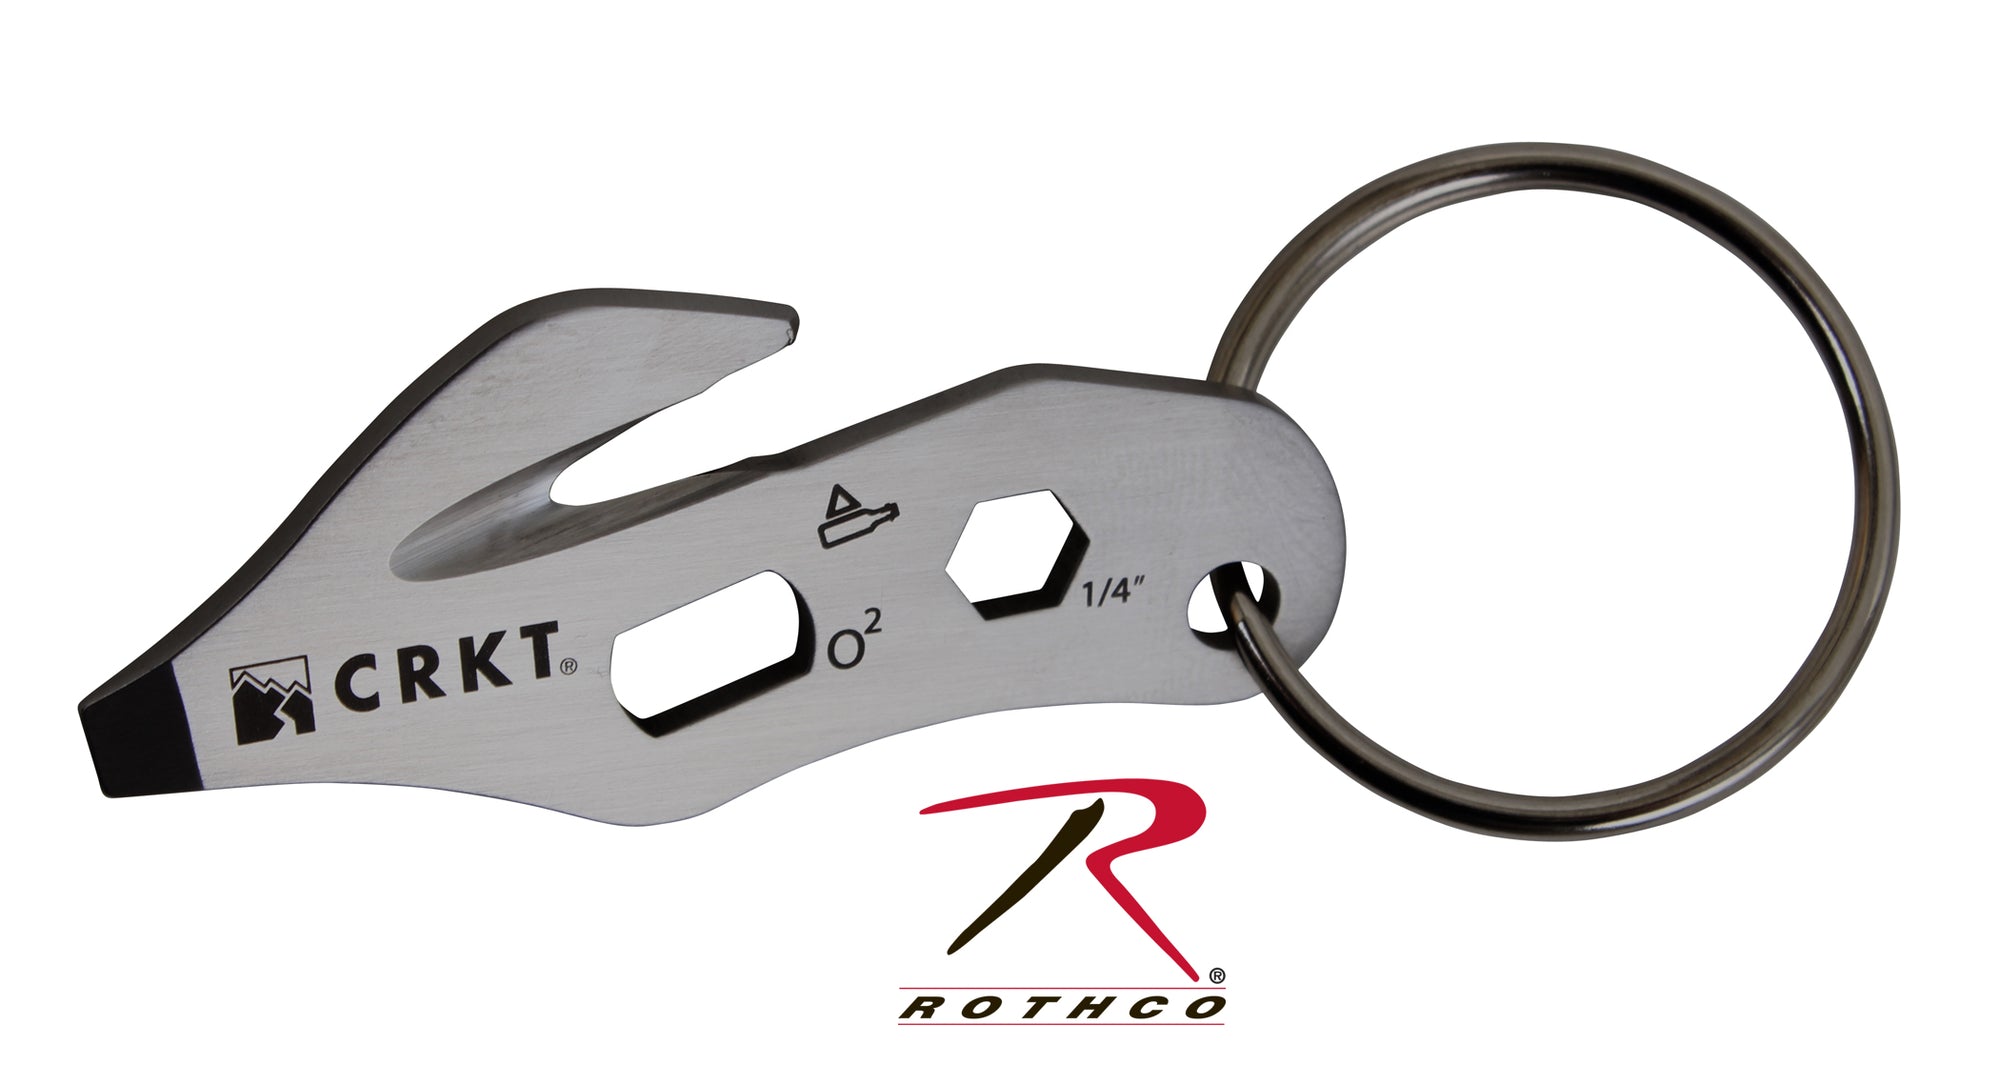 Colombia River Crkt Kert/Key Ring Emergency Rescue Tool